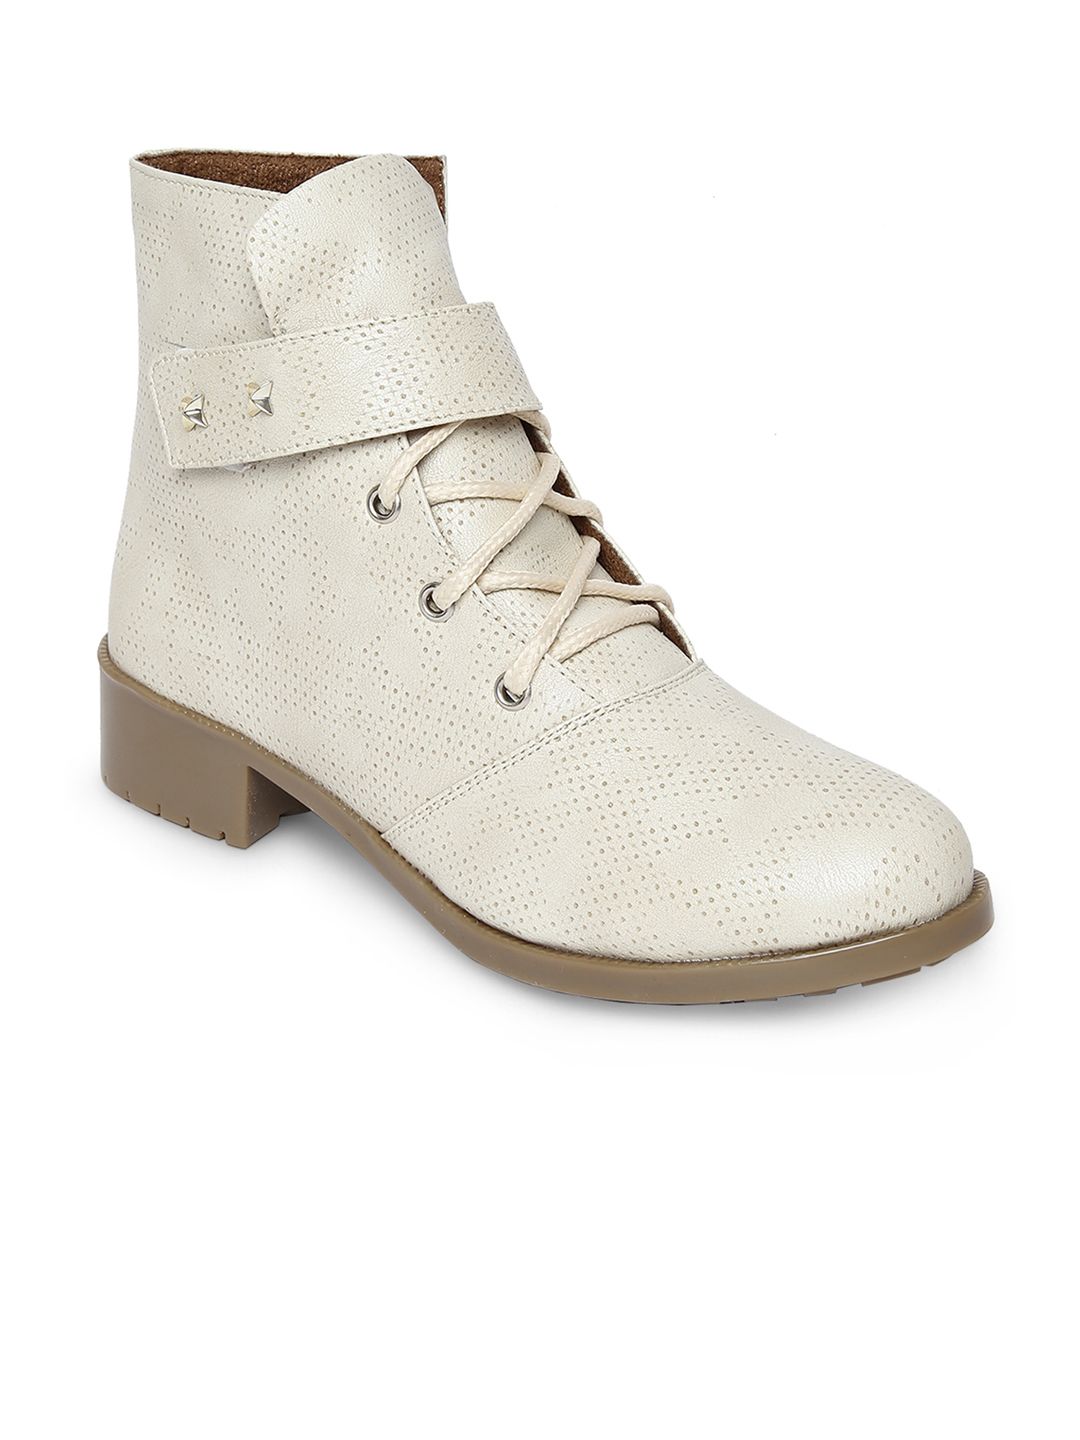 Marc Loire Women Cream-Coloured Perforations Synthetic Leather Mid-Top Flat Boots Price in India